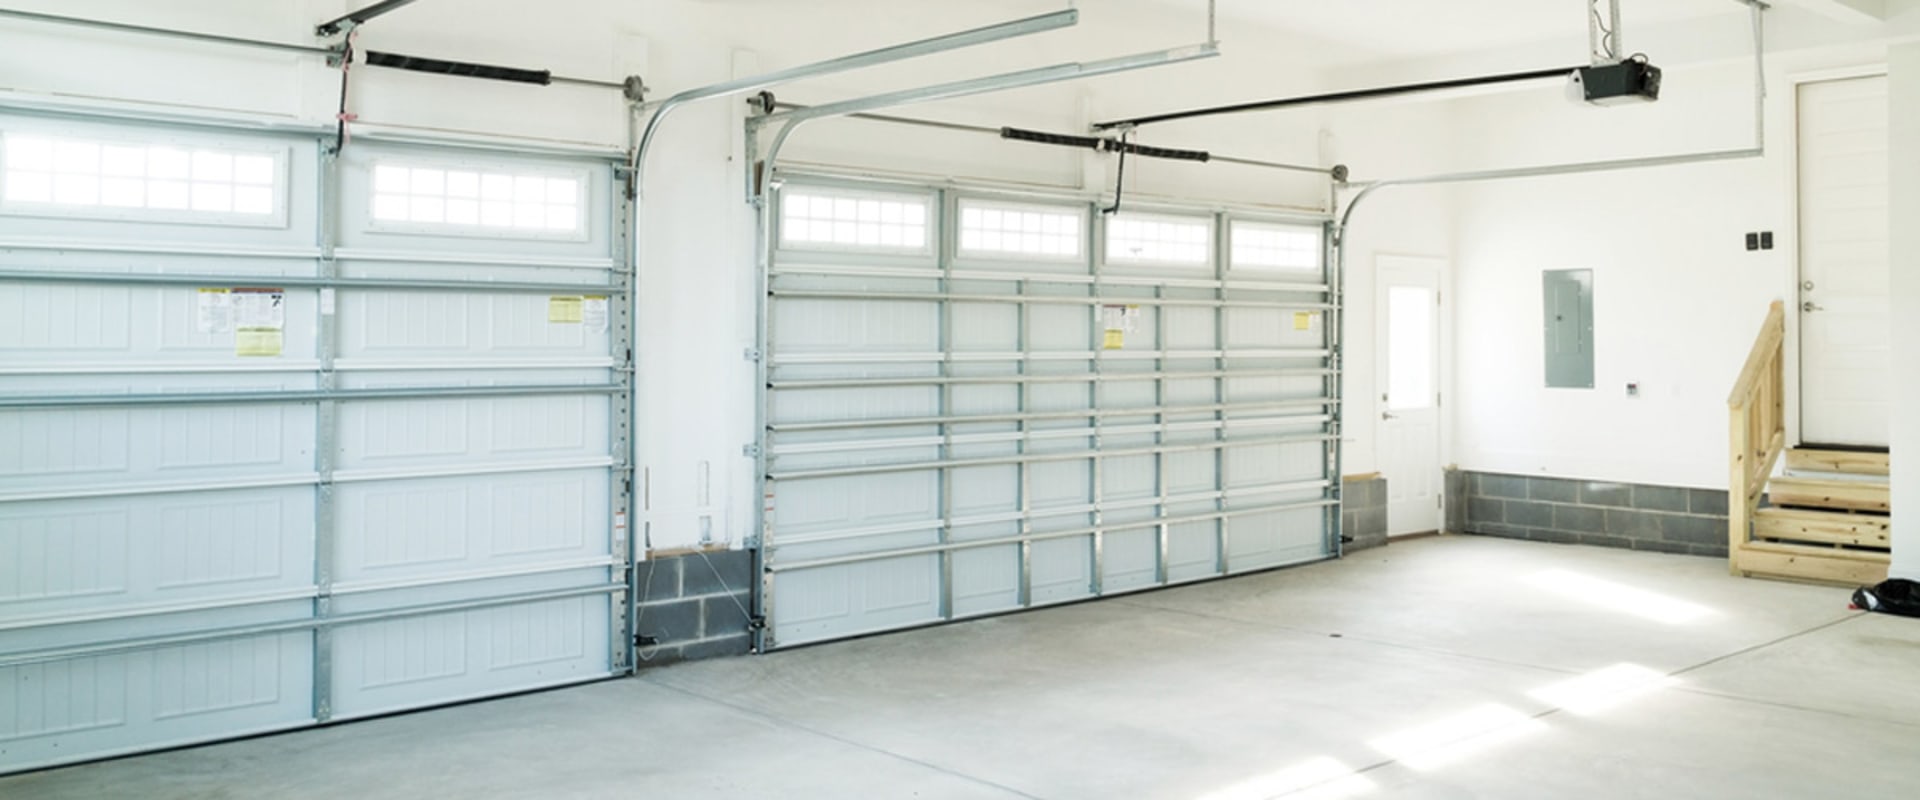 How Much Does a New Garage Door Opener Cost Installed?